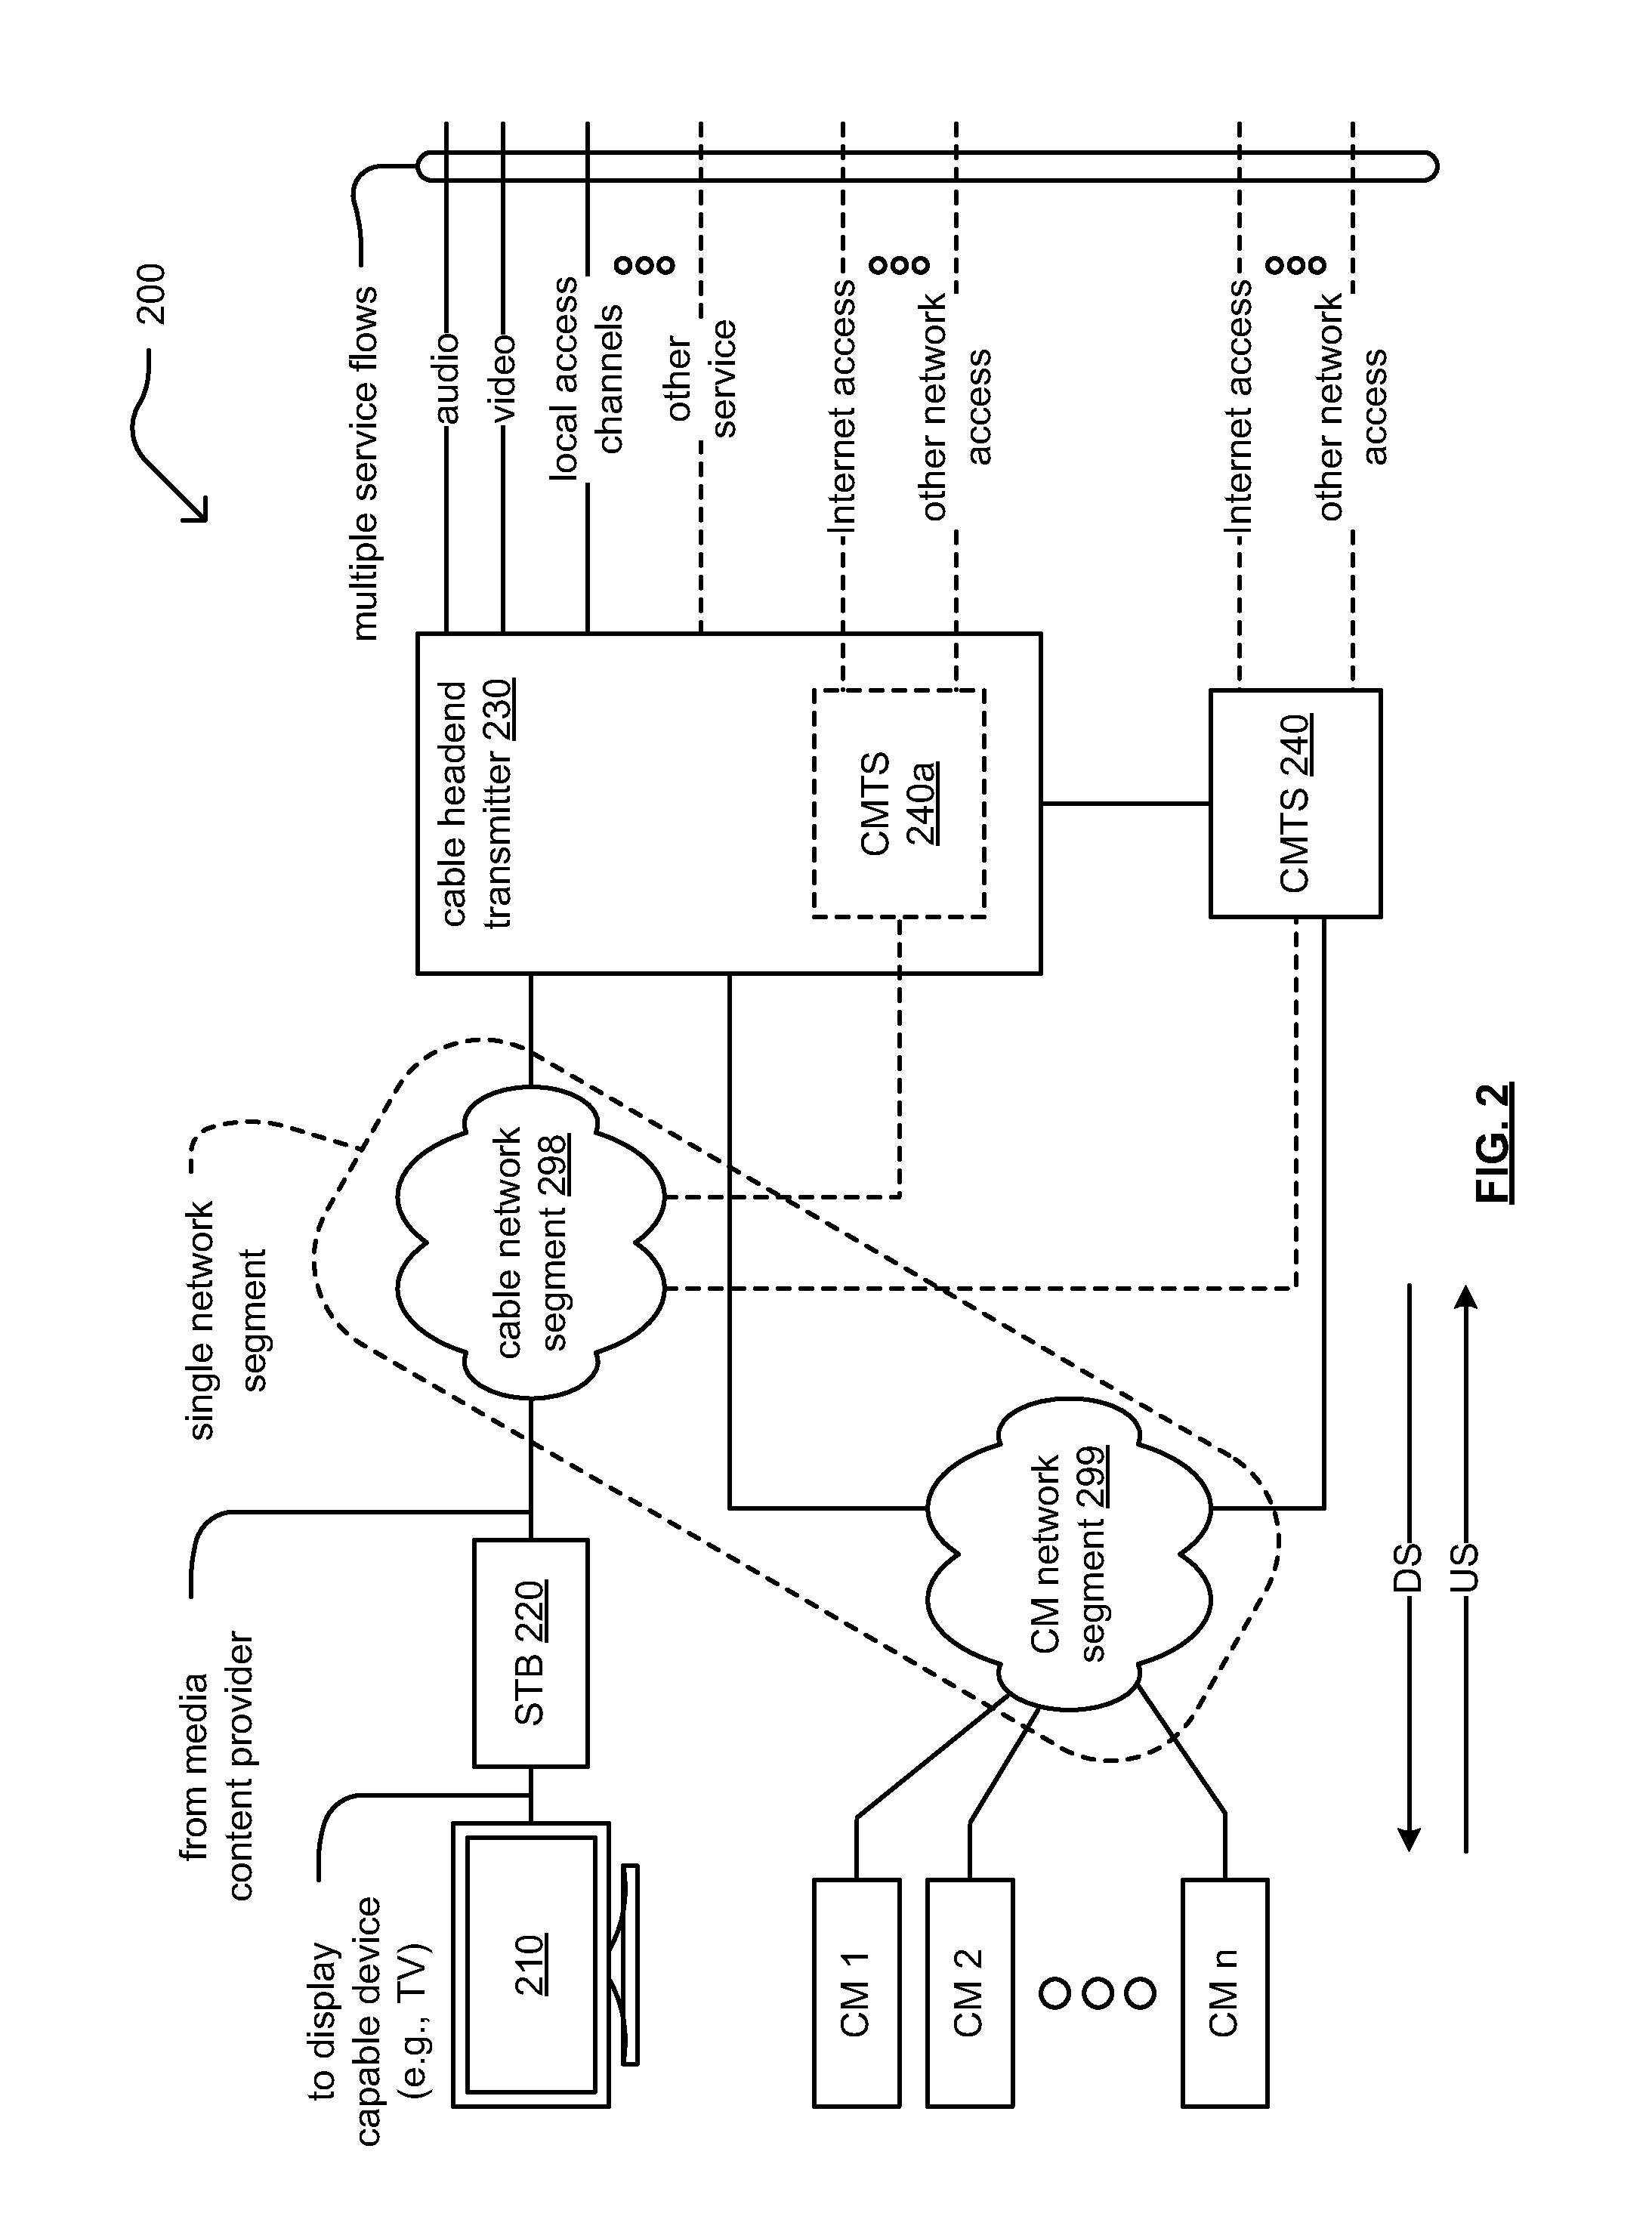 Interference cancellation within OFDM communications